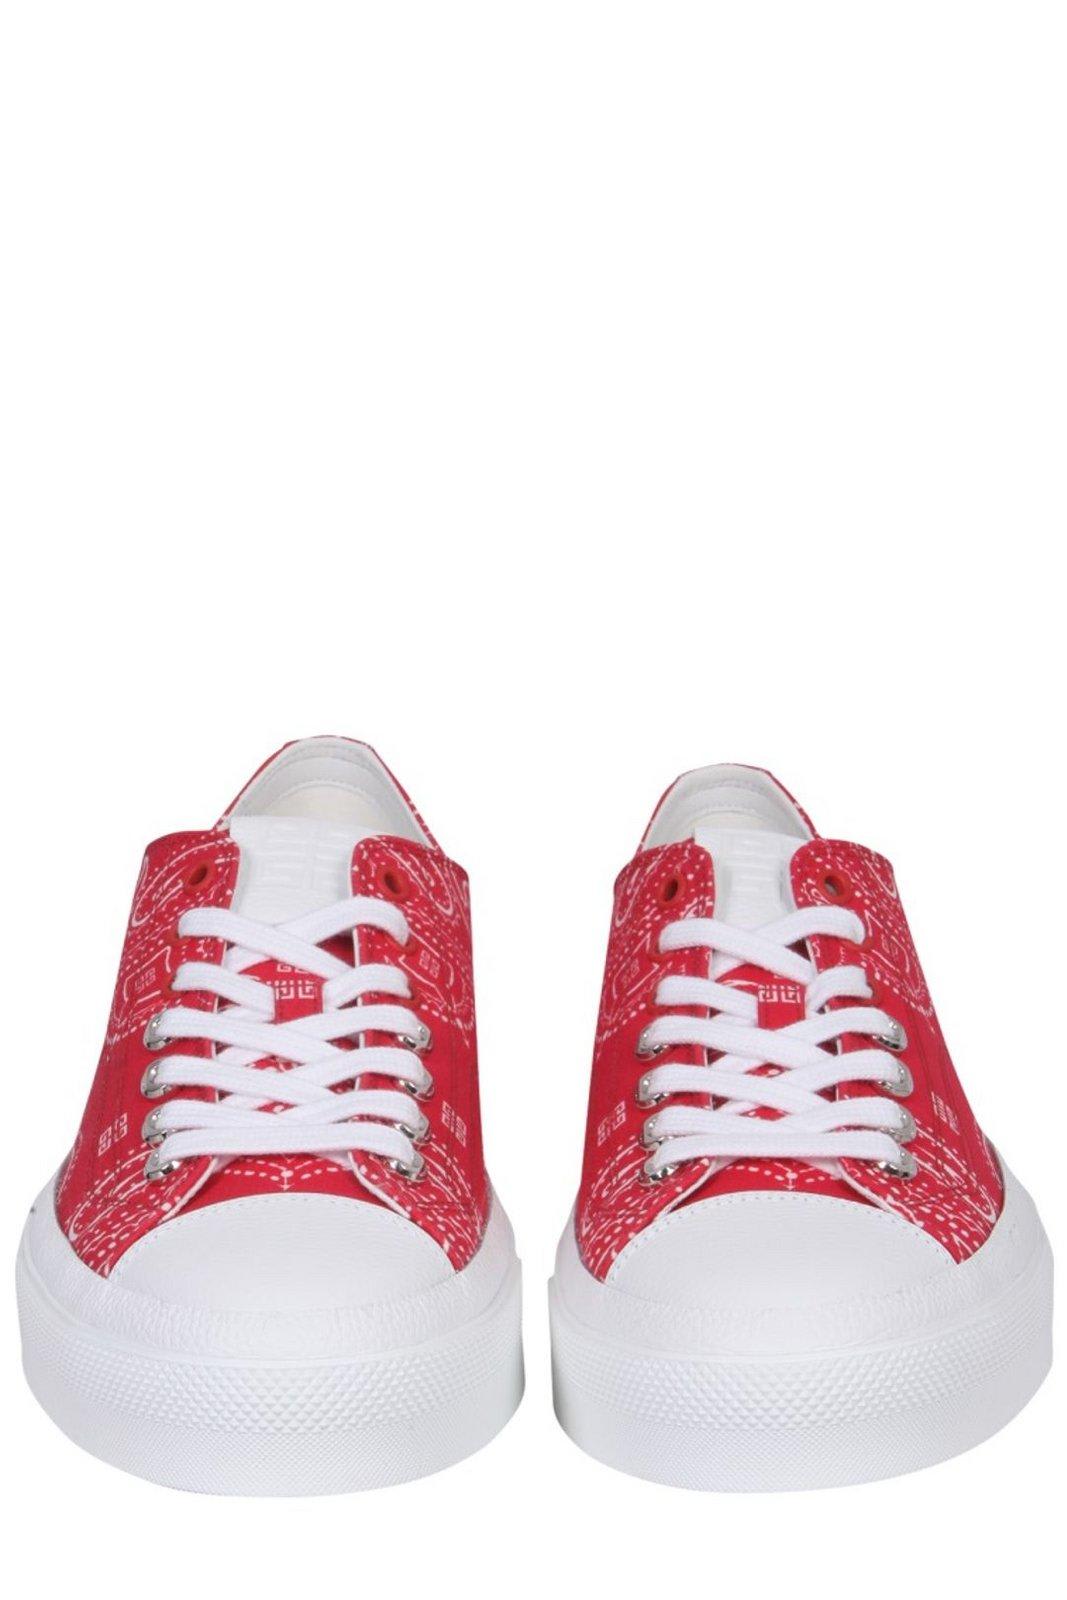 Shop Givenchy Bandana Printed City Sneakers In Red